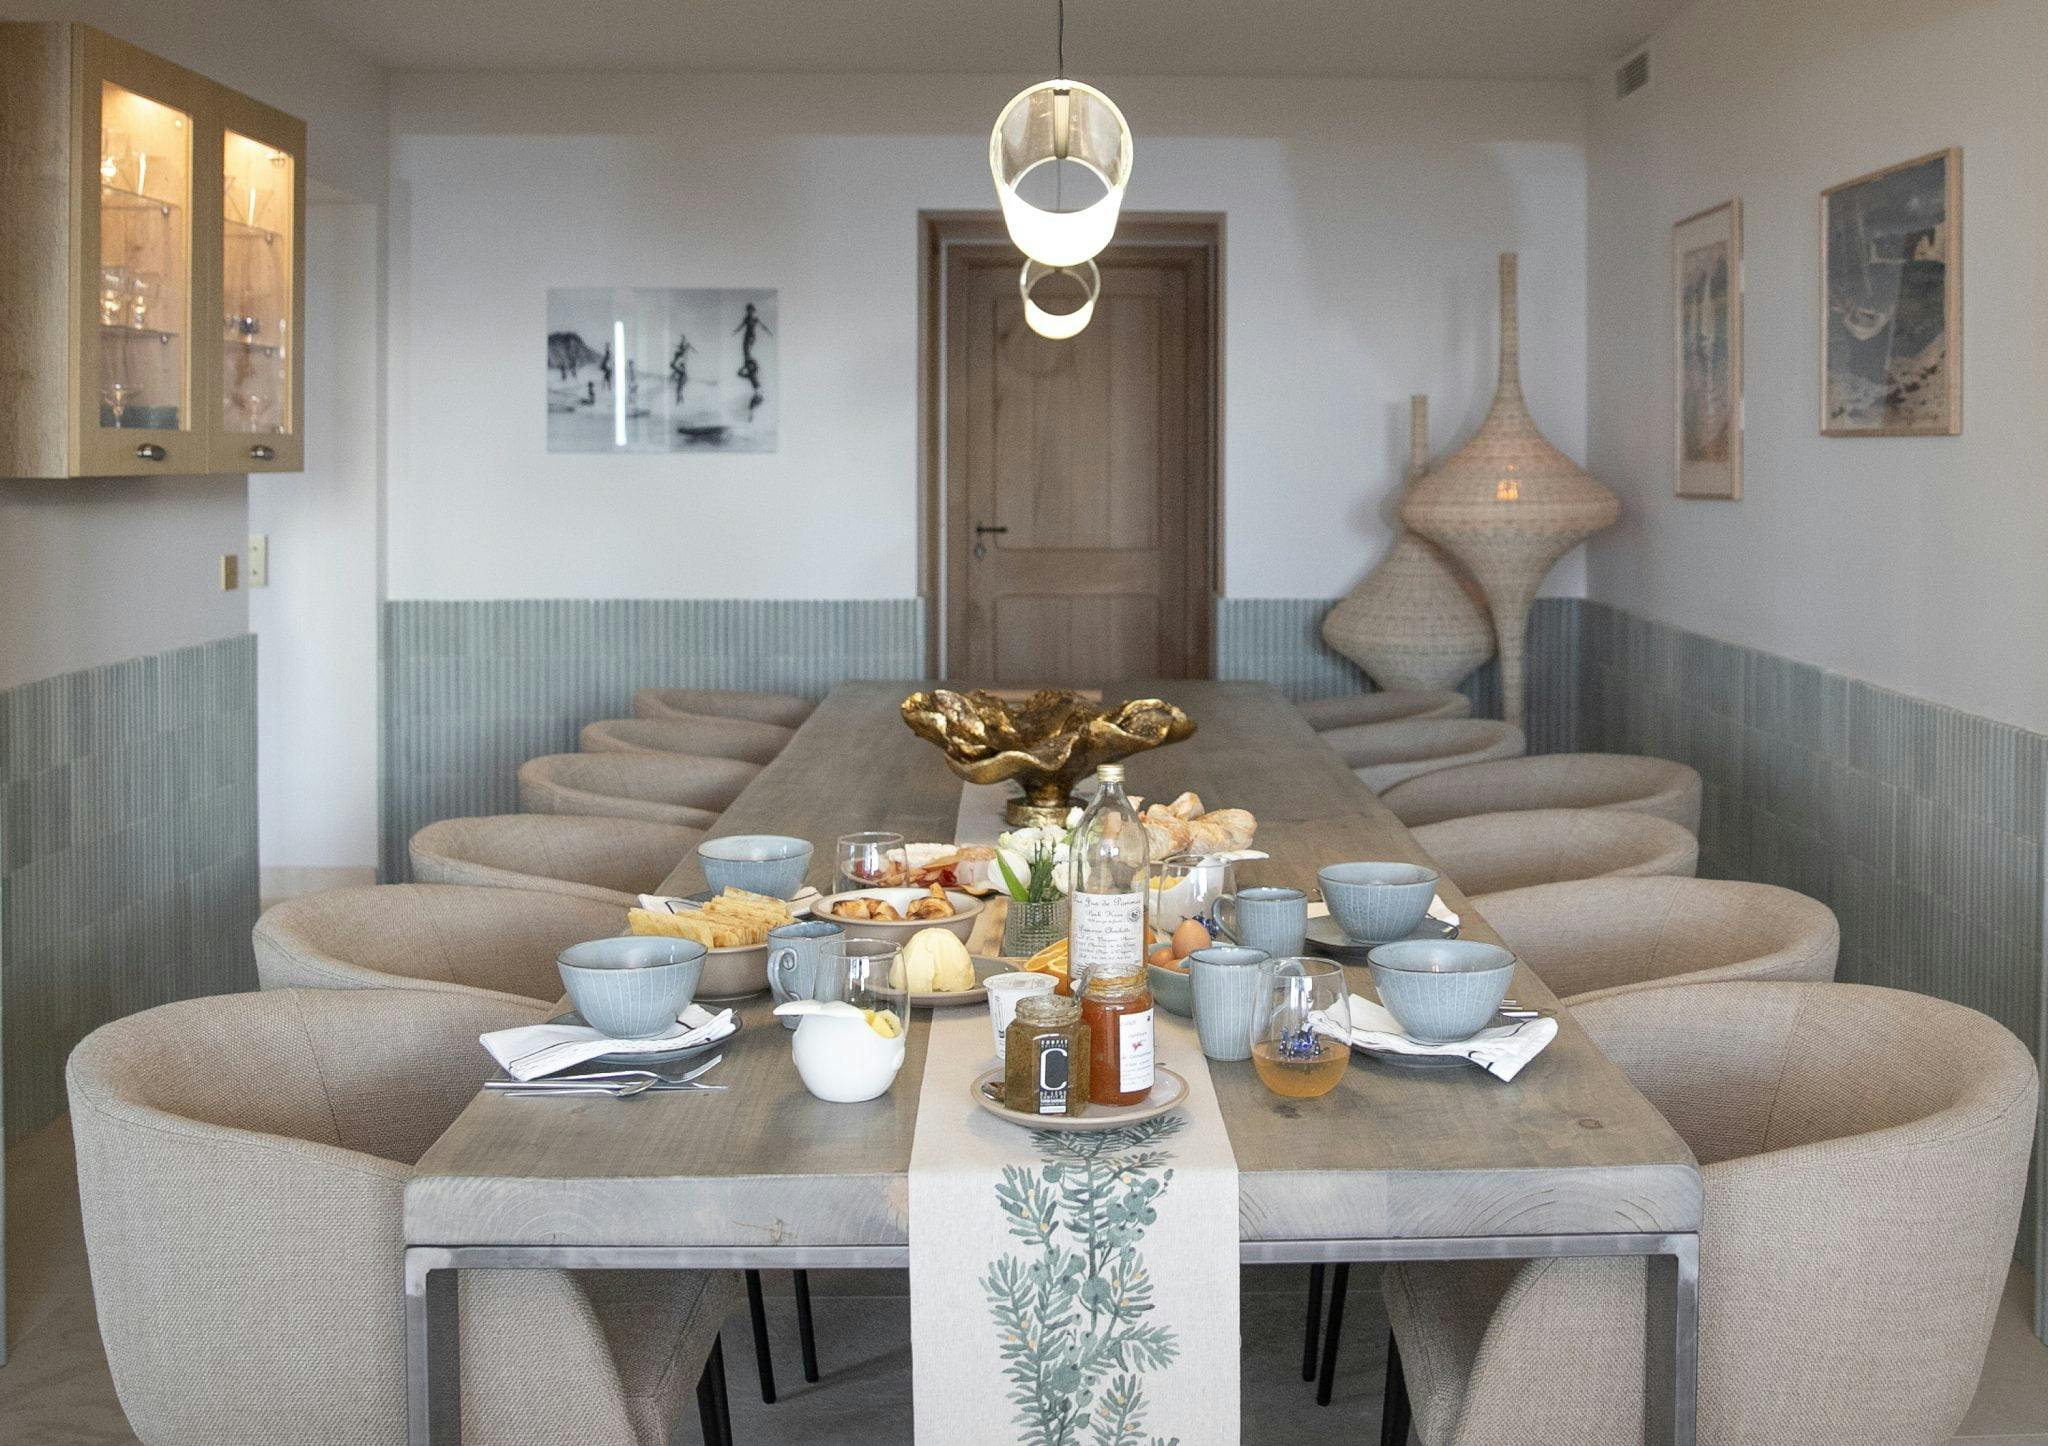 Dining table, decorated in wood and blue tones